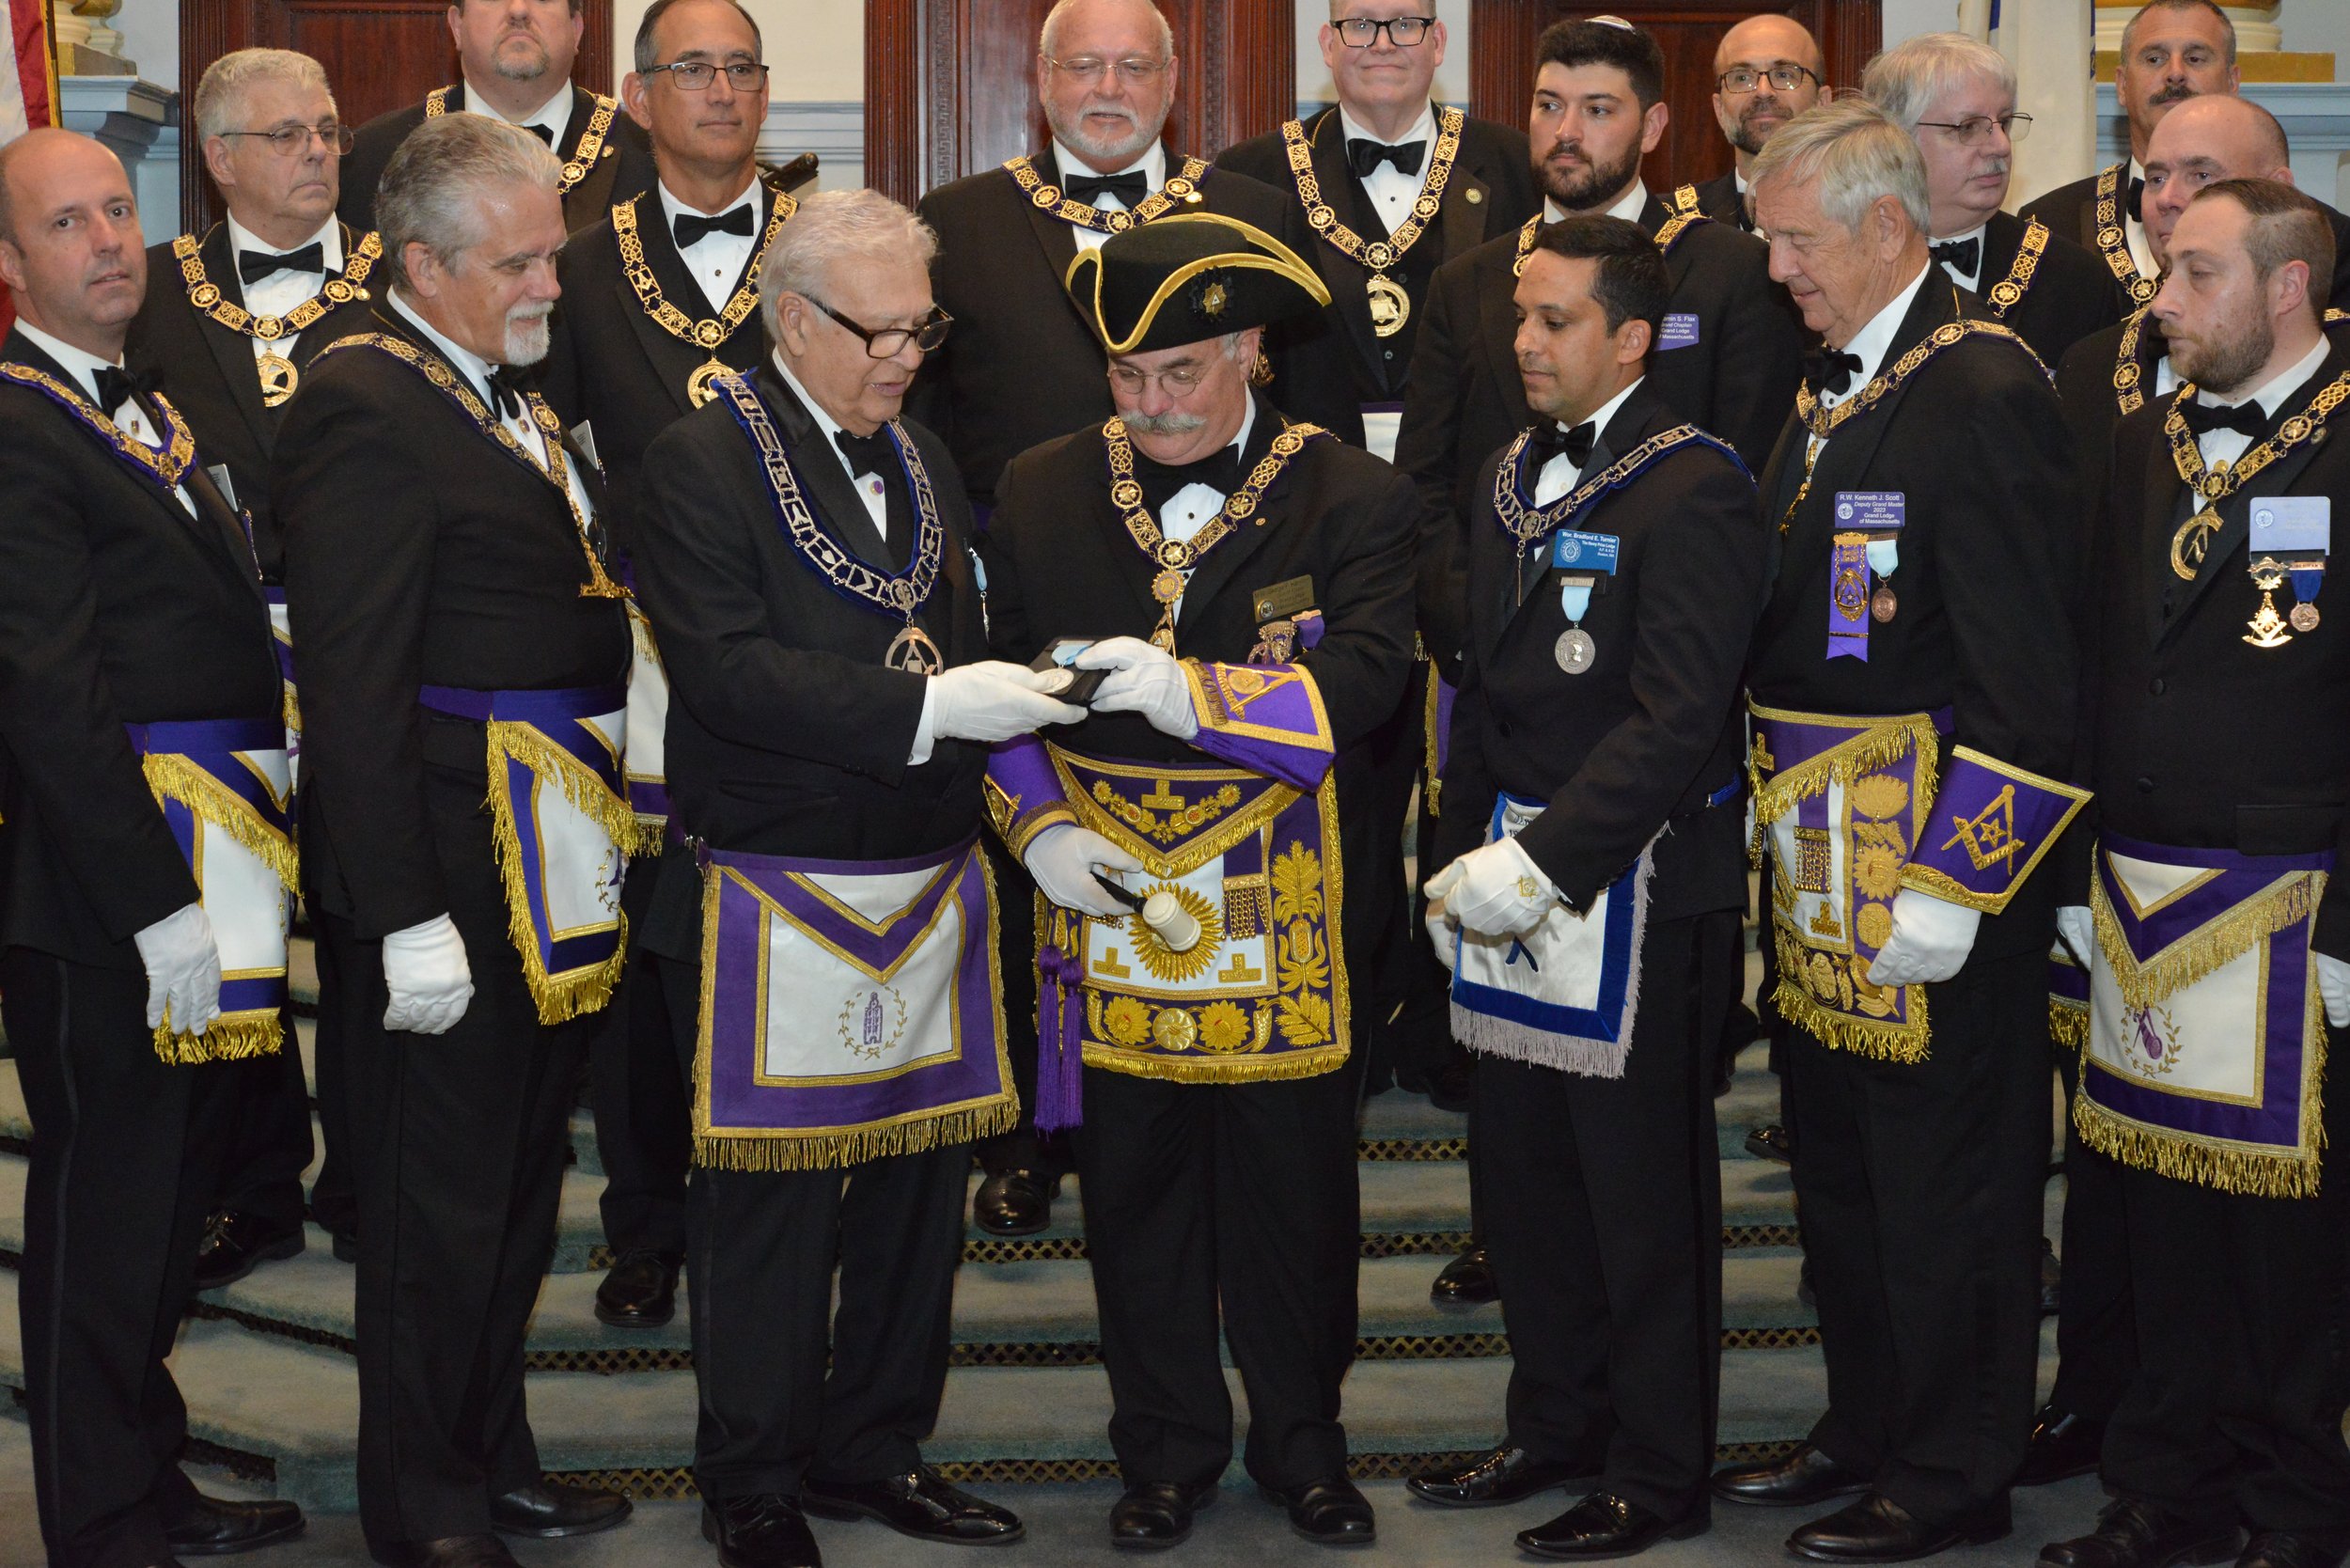  The presentation of The Henry Price Lodge breast jewel to the Grand Master by Rt. Wor. Ernest Pearlstein. 